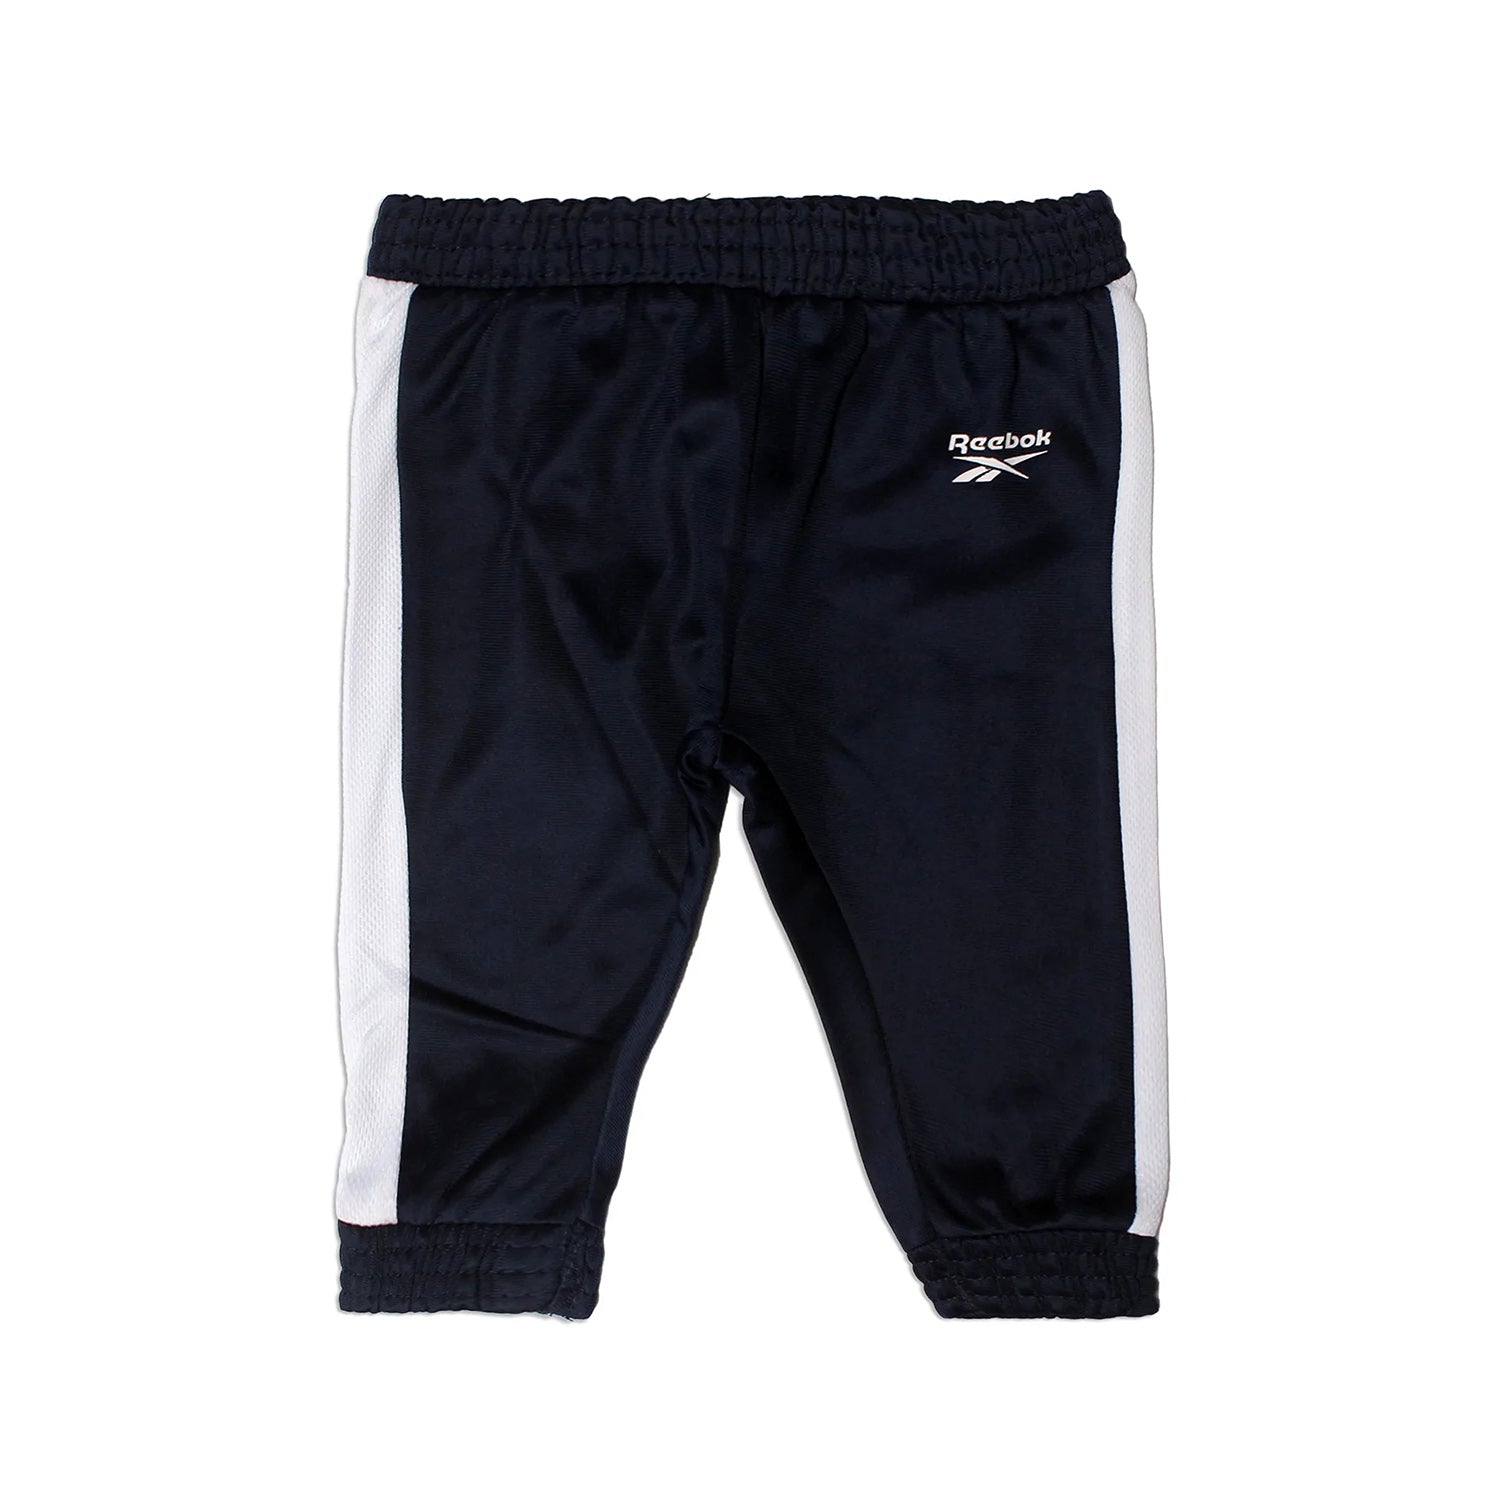 NEW NAVY BLUE WITH WHITE STRIPES JOGGER PANTS TROUSER